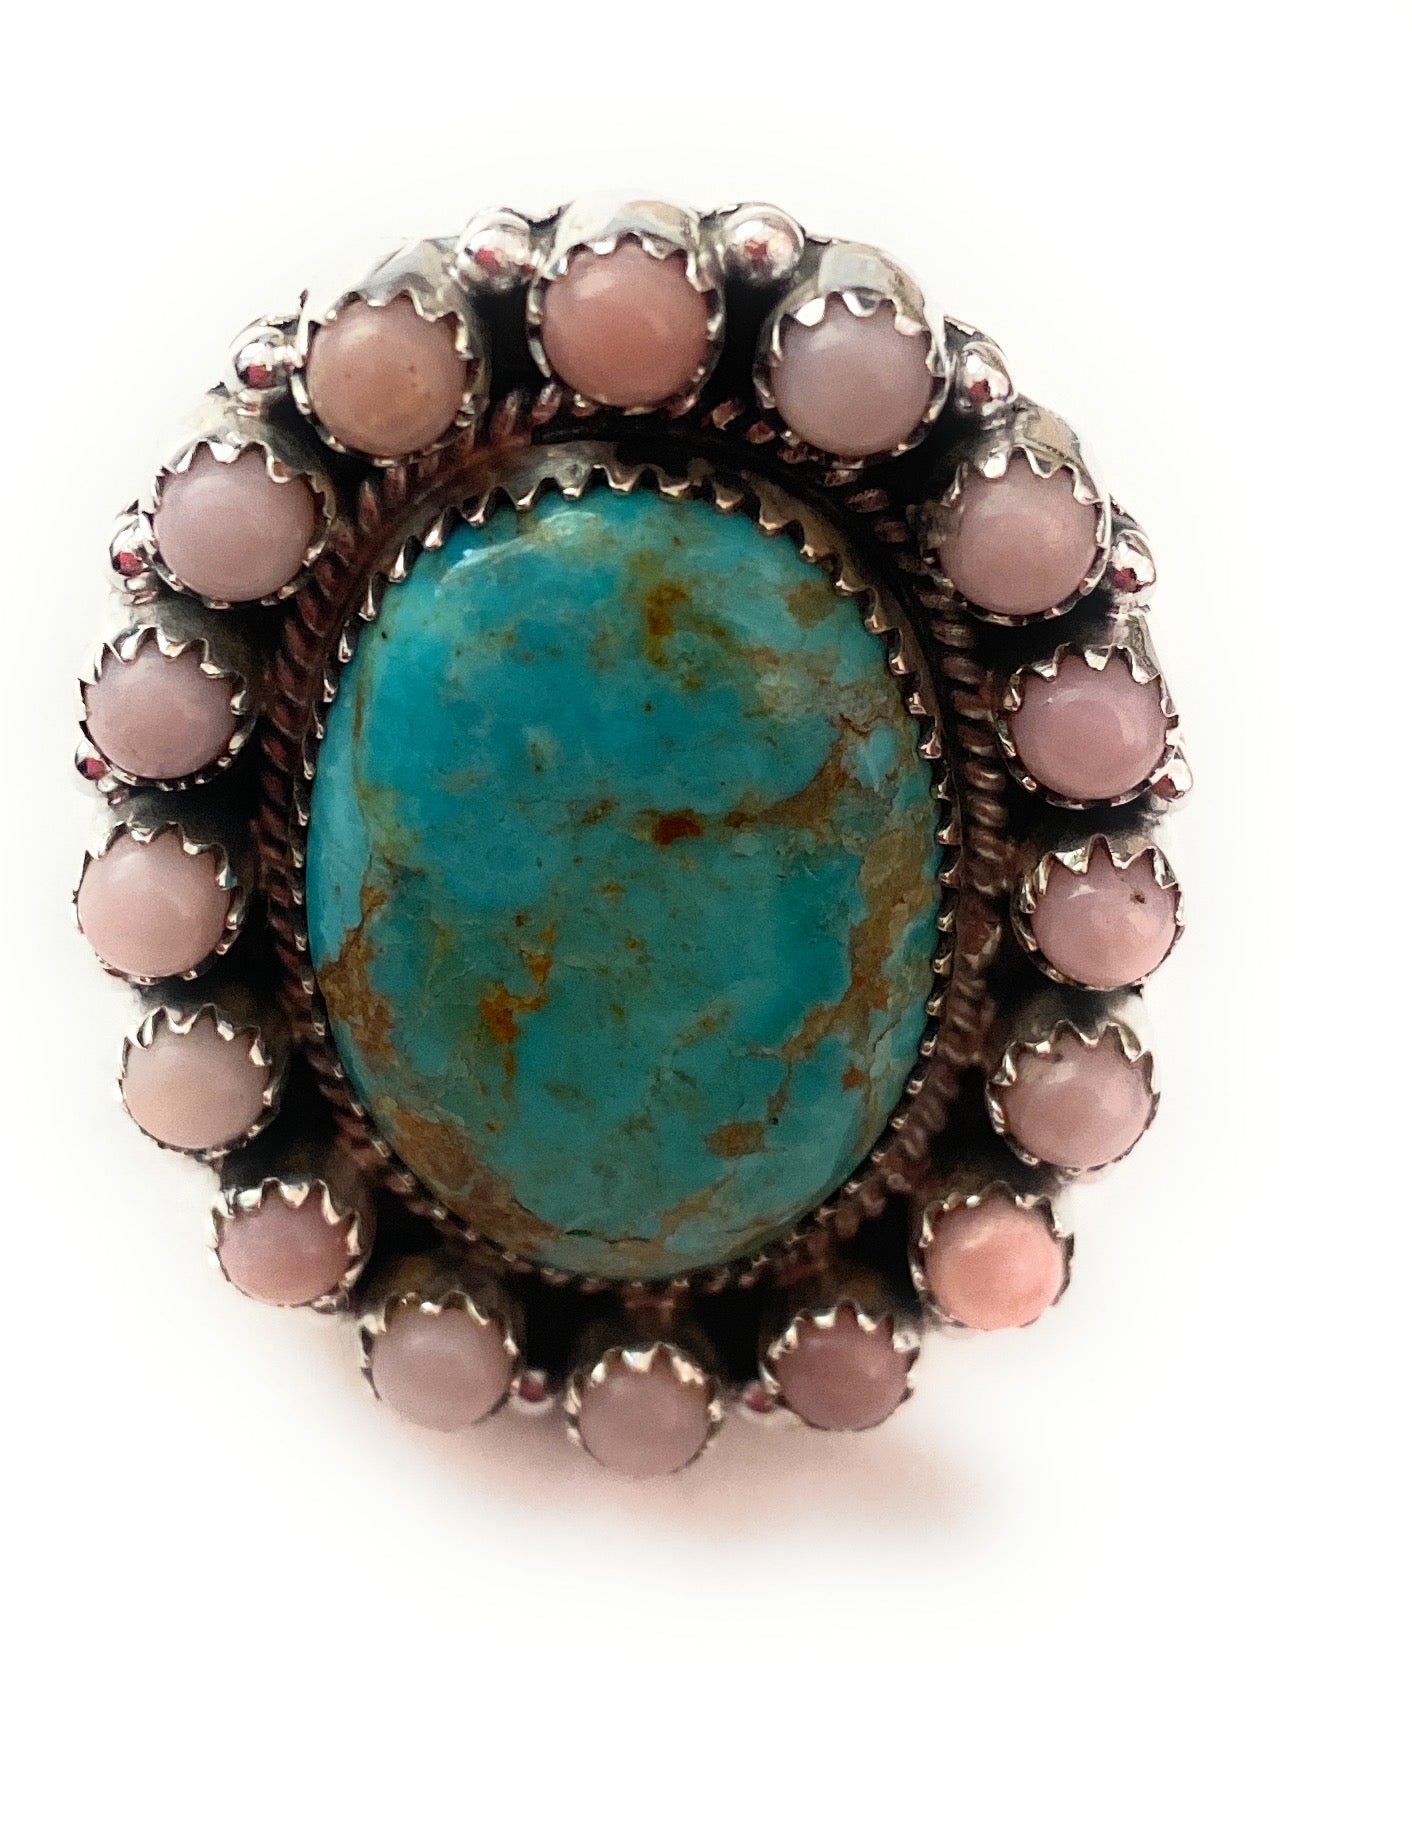 Handmade Sterling Silver Turquoise & Mother of Pearl Cluster Adjustable Ring